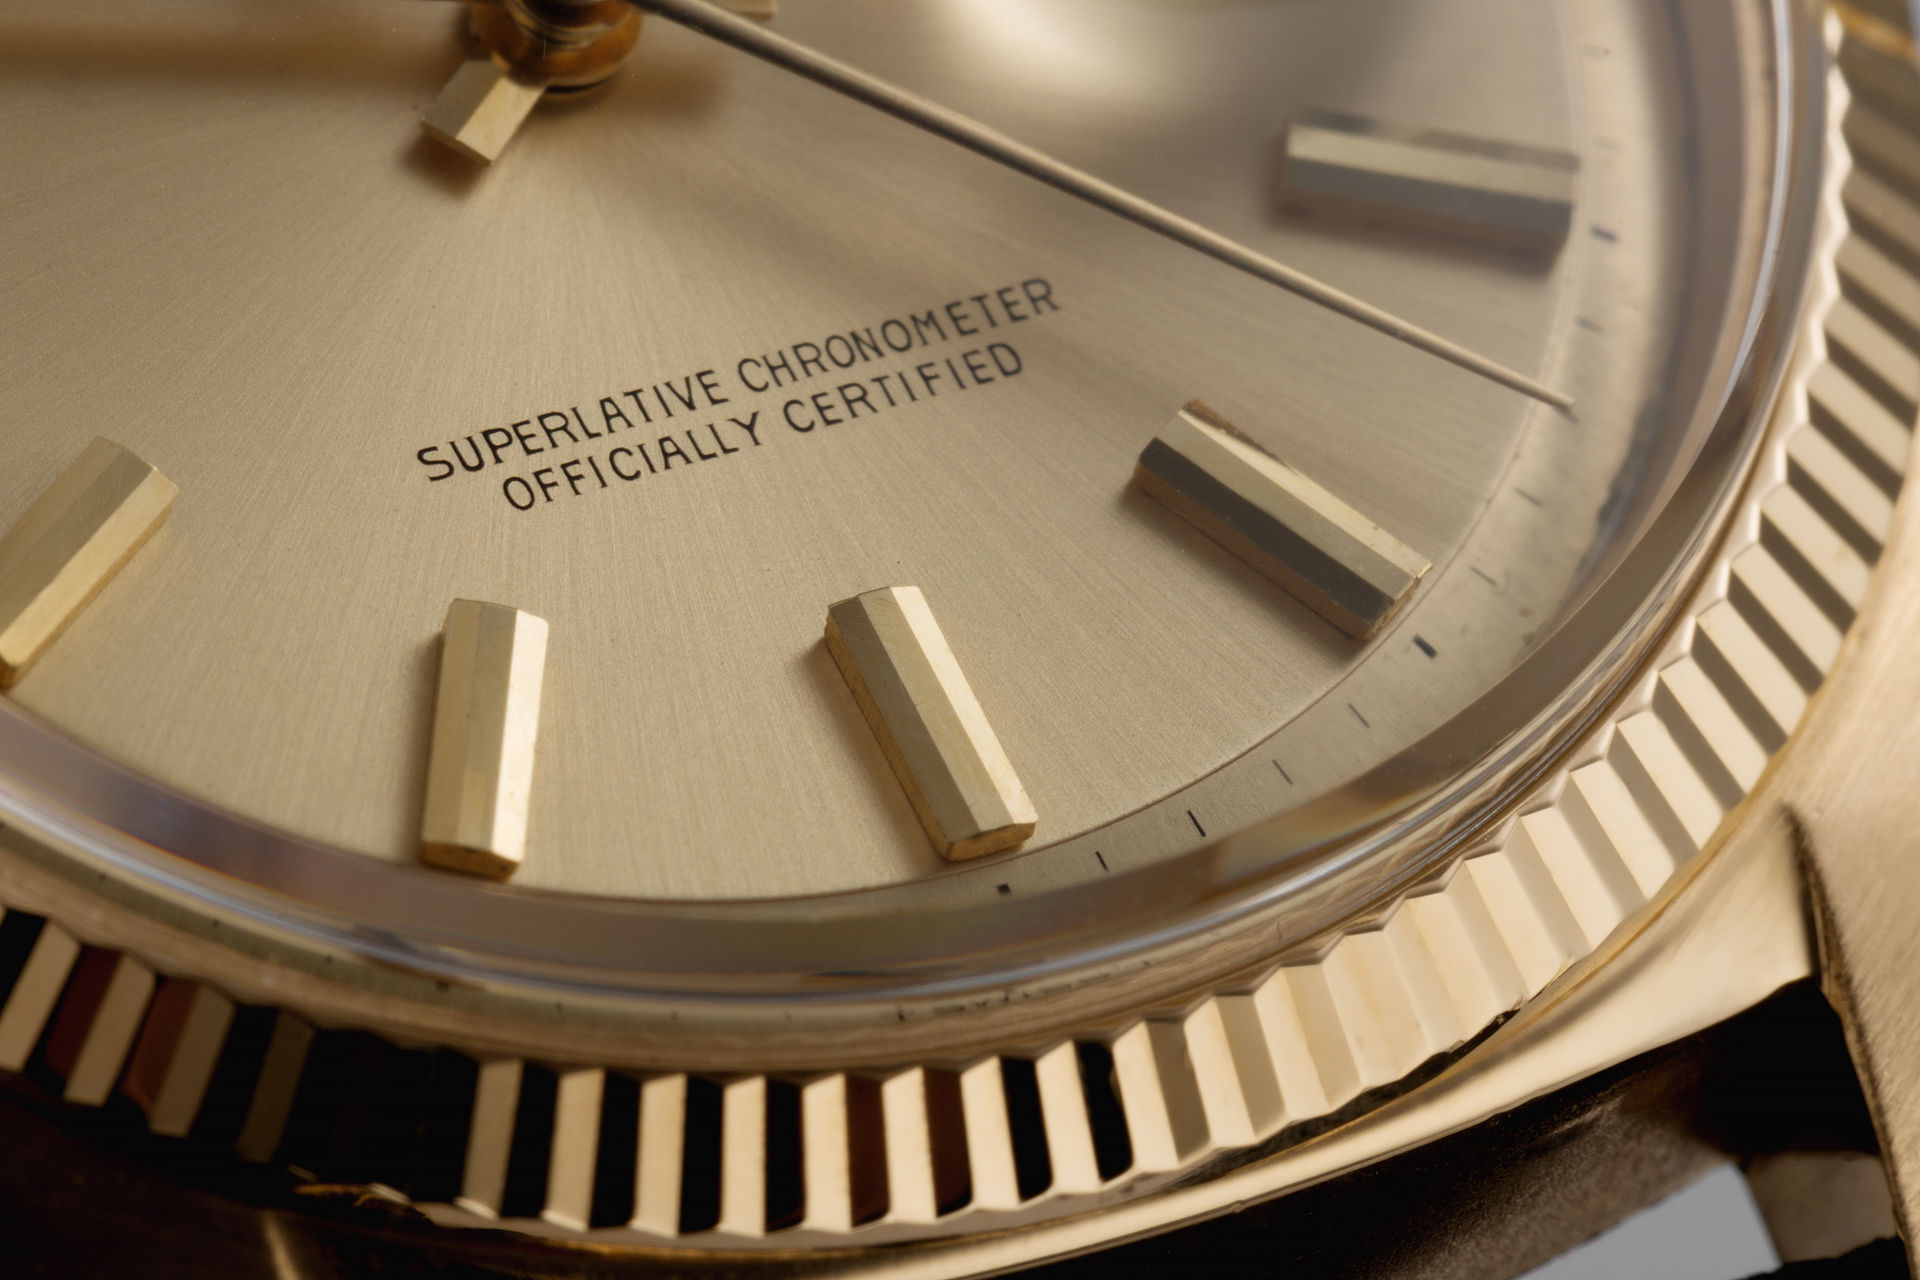 ref 6605 | 18ct Yellow Gold 'Butterfly Rotor' | Rolex Datejust